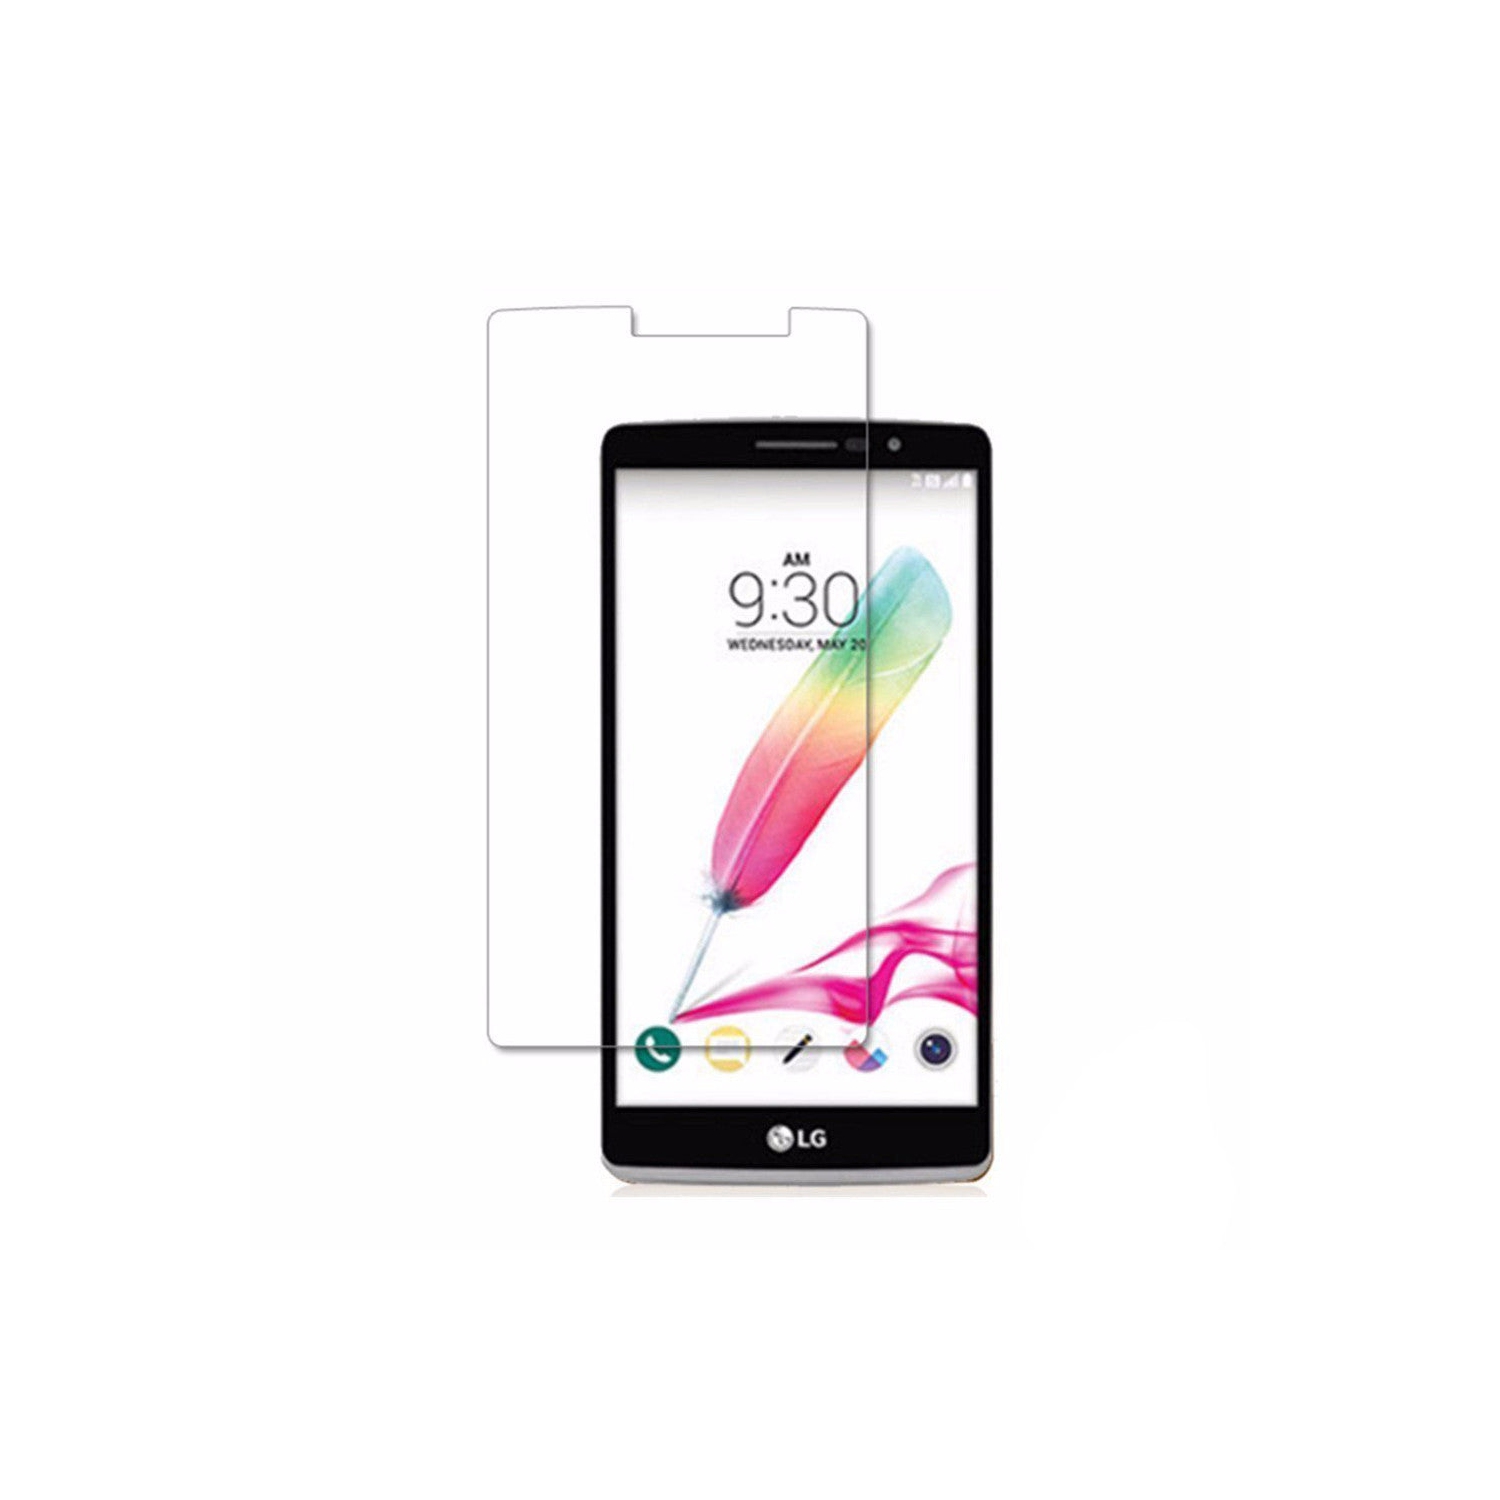 LG G4 Stylus / G Stylo / G4 Note - Premium Real Tempered Glass Screen Protector Film [Pro-Mobile]